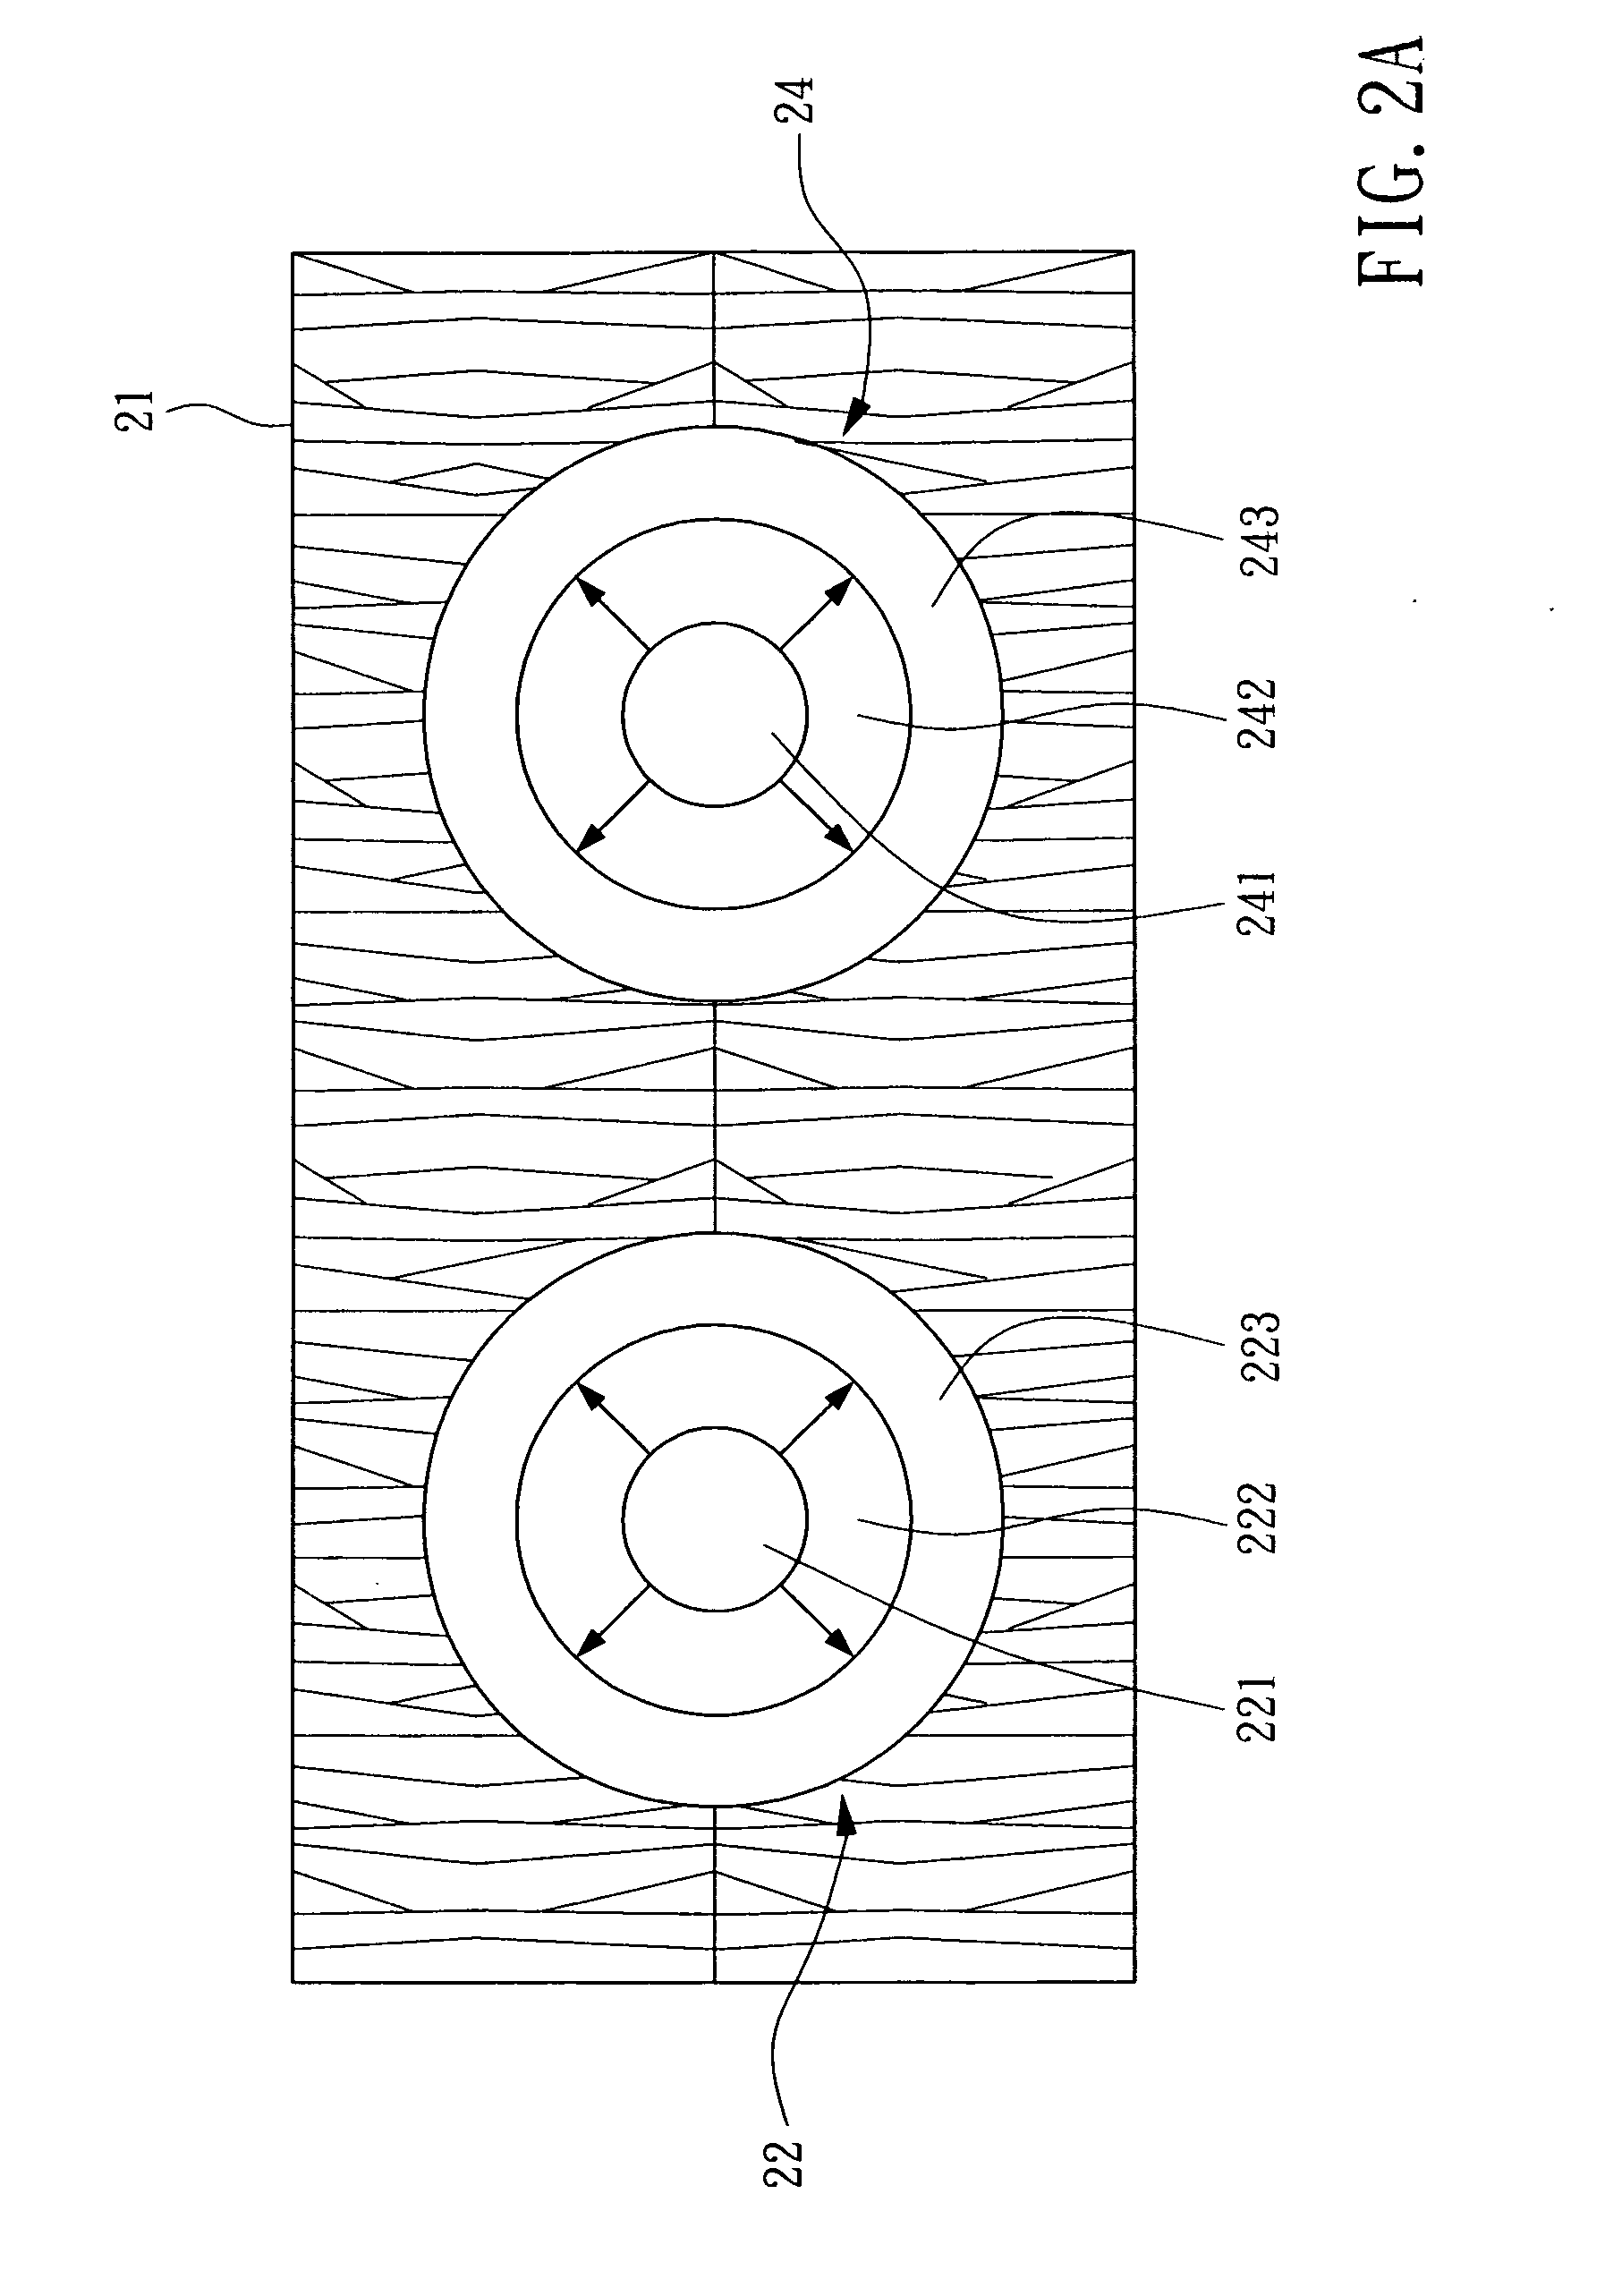 Thin film transistor device with high symmetry